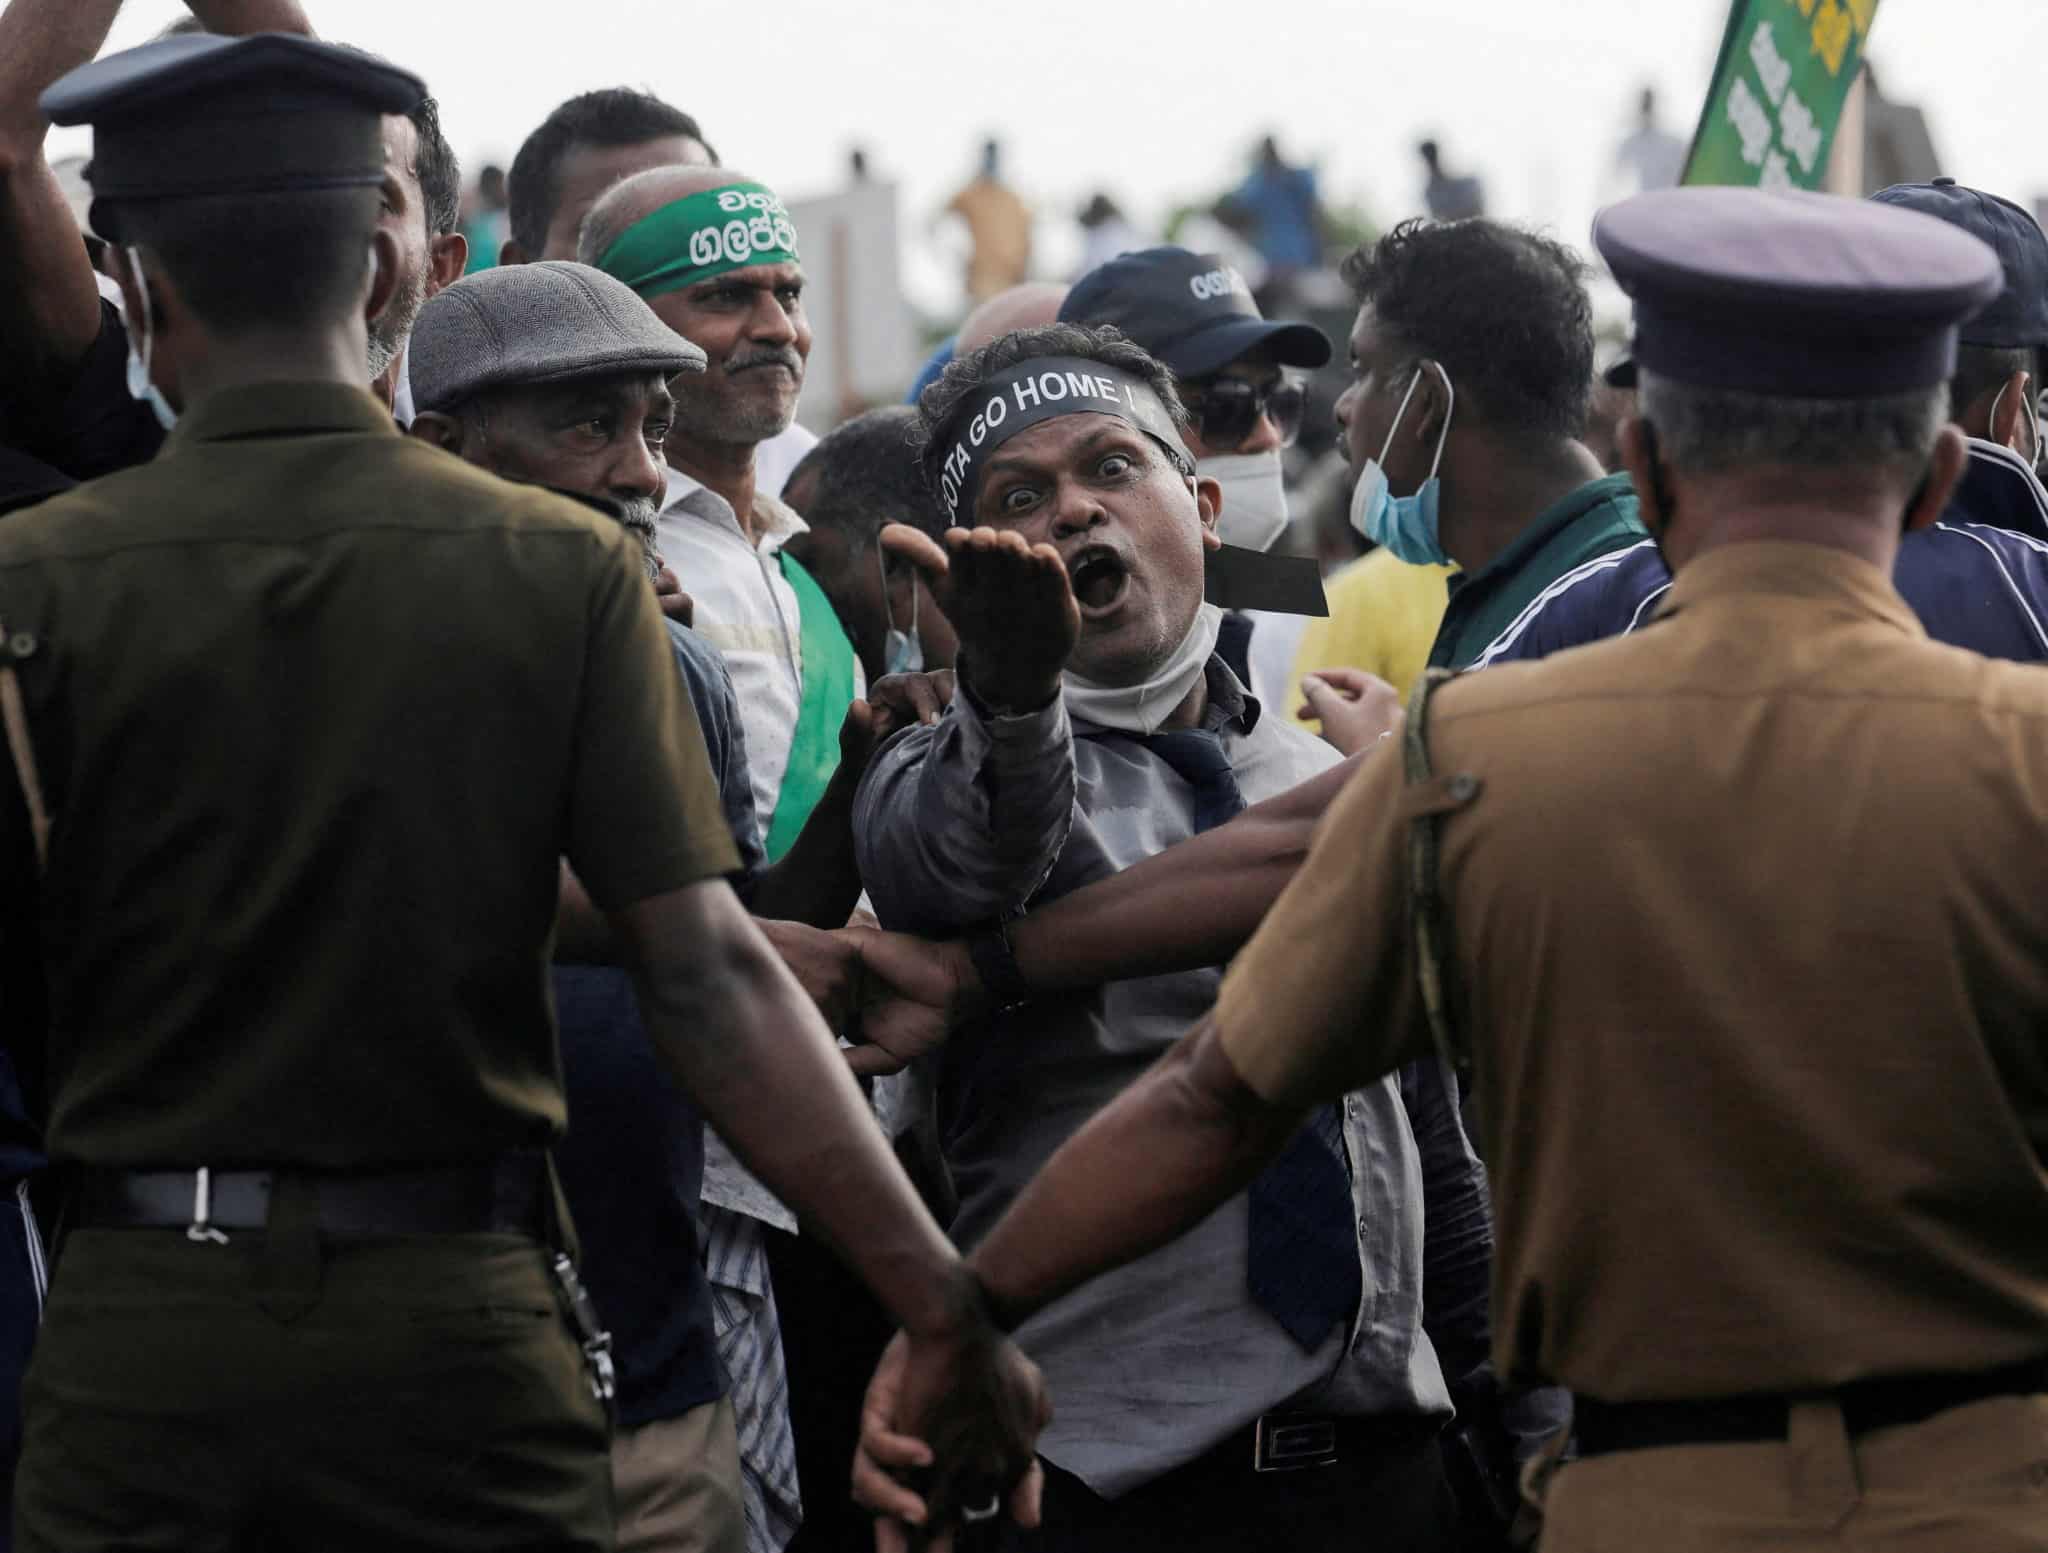 A man shouts against President Gotabaya Rajapaksa as people block the main road in front of the President's secretariat during a protest organised by main opposition party Samagi Jana Balawegaya against the worsening economic crisis that has brought fuel shortages and spiralling food prices in Colombo, Sri Lanka, March 15, 2022.,Image: 670958951, License: Rights-managed, Restrictions: , Model Release: no, Credit line: DINUKA LIYANAWATTE / Reuters / Forum